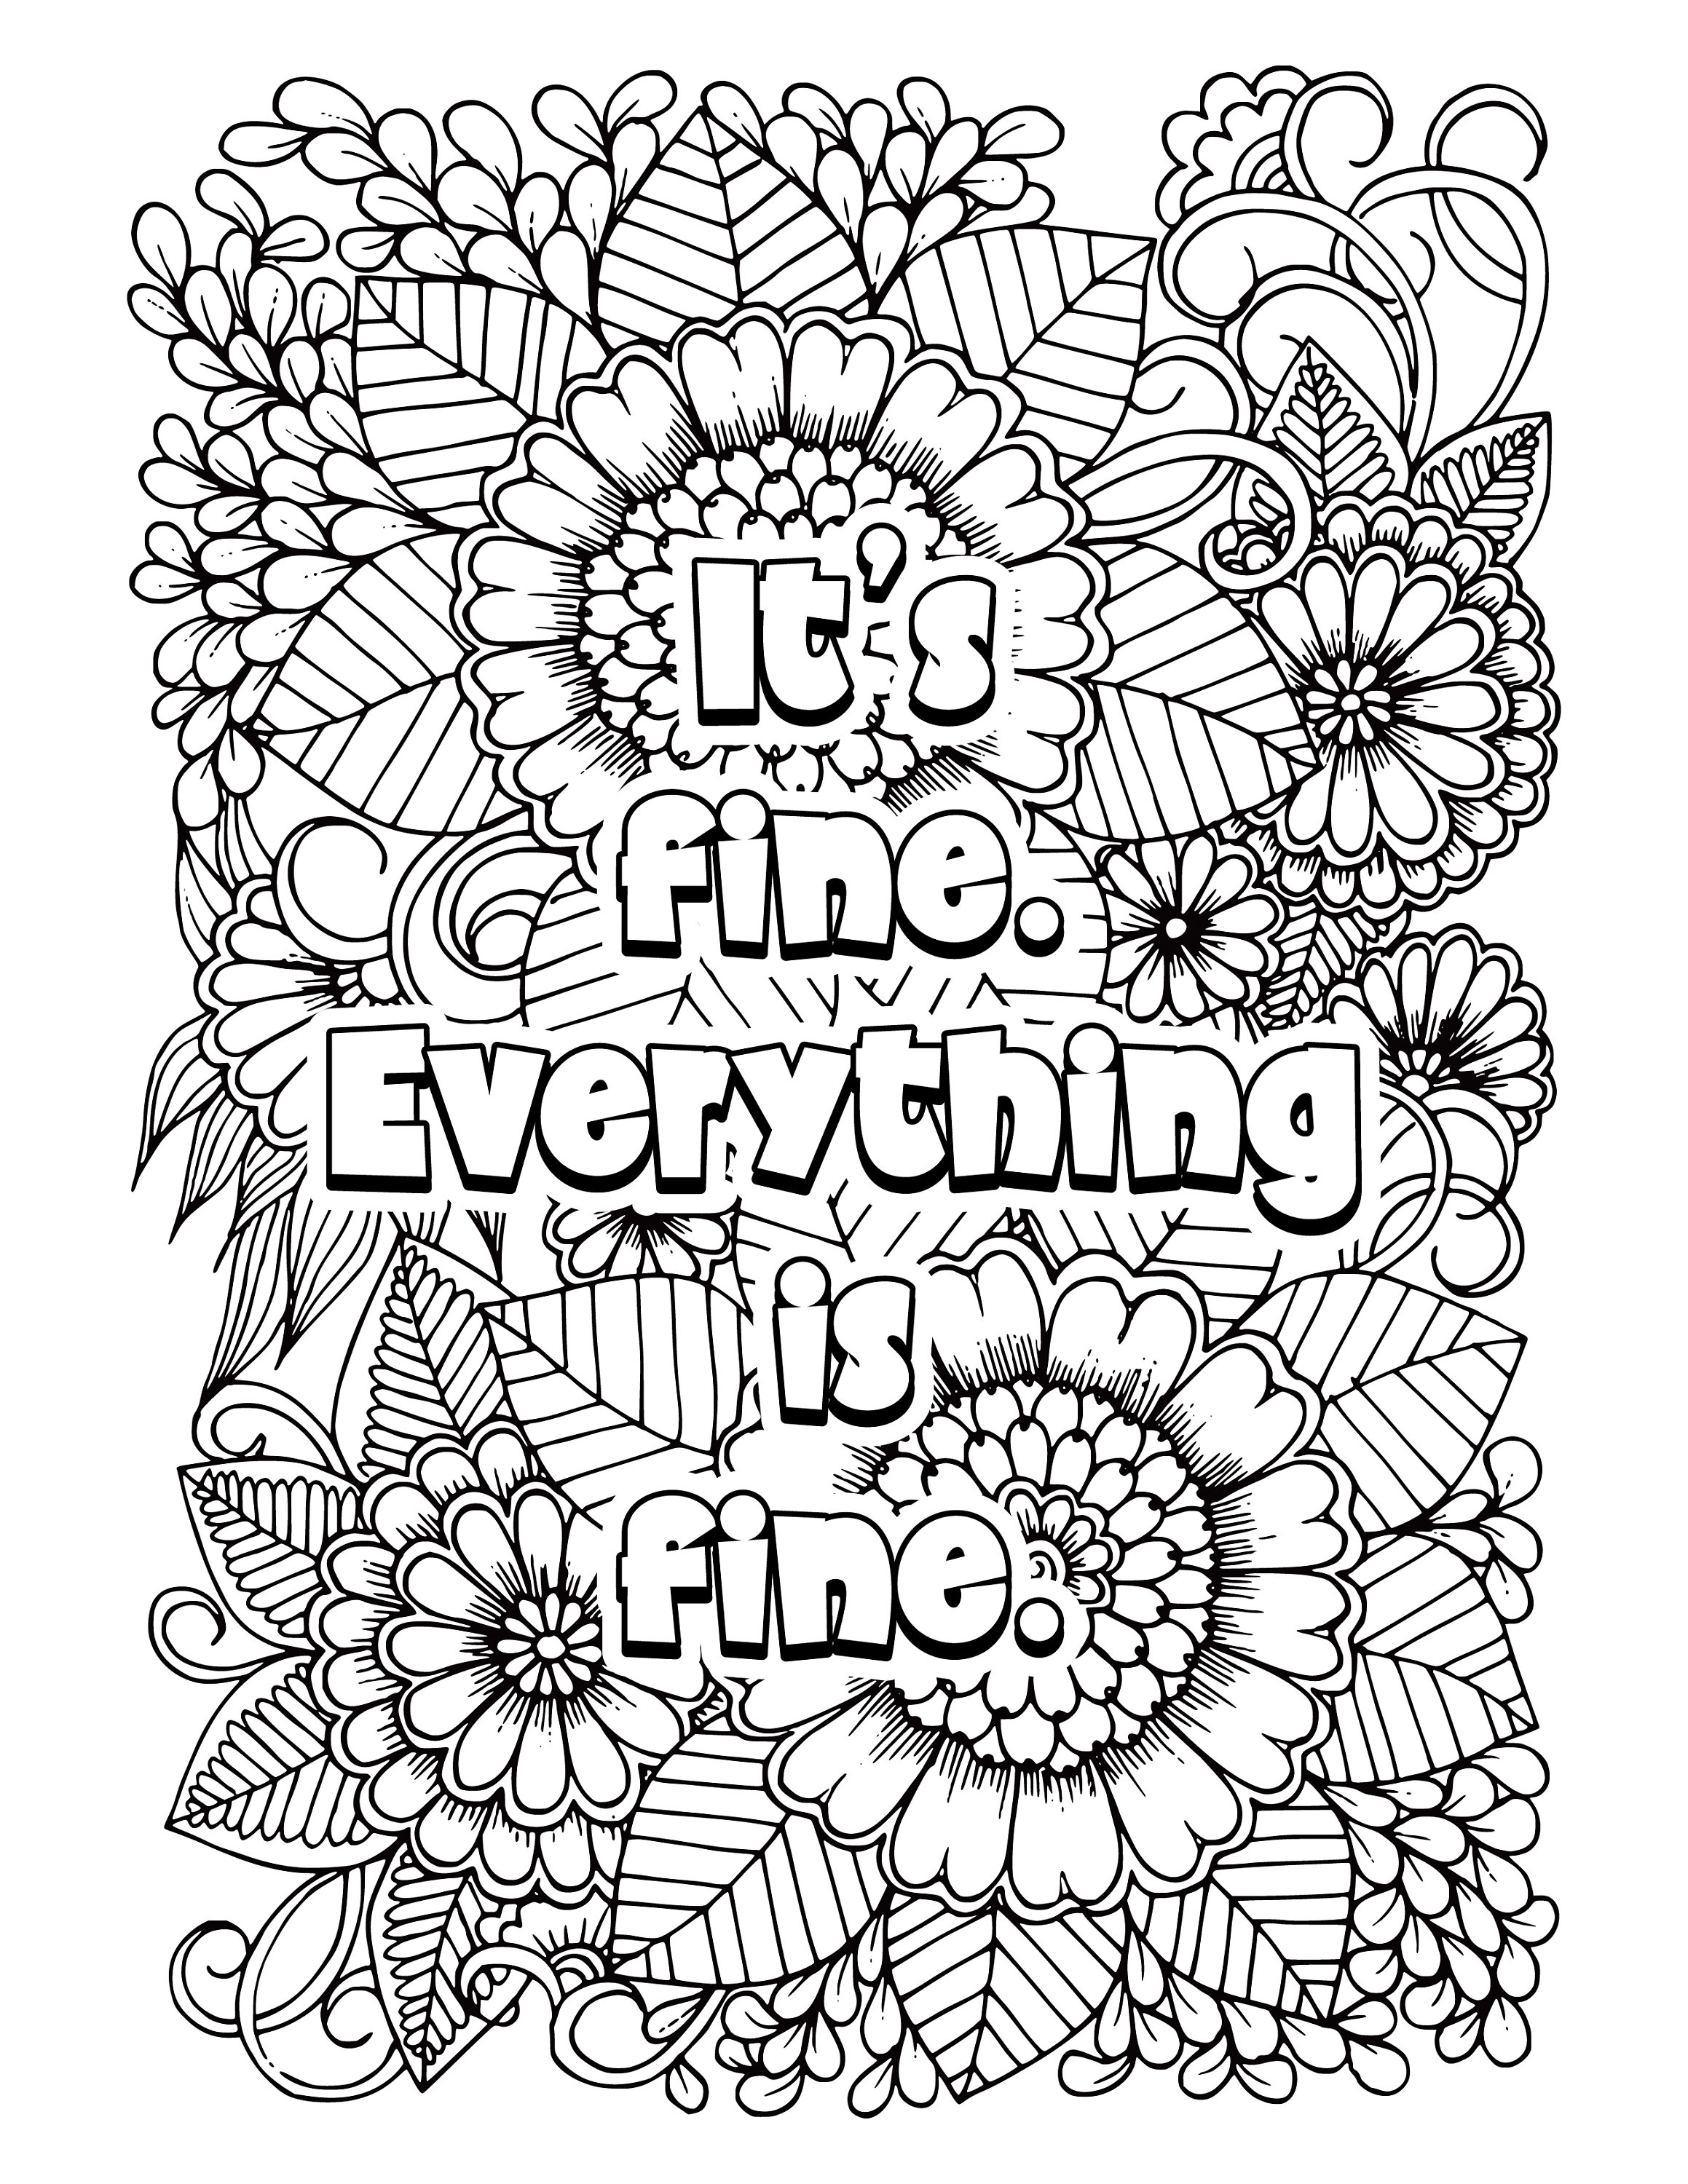 Funny adult coloring book printable pages